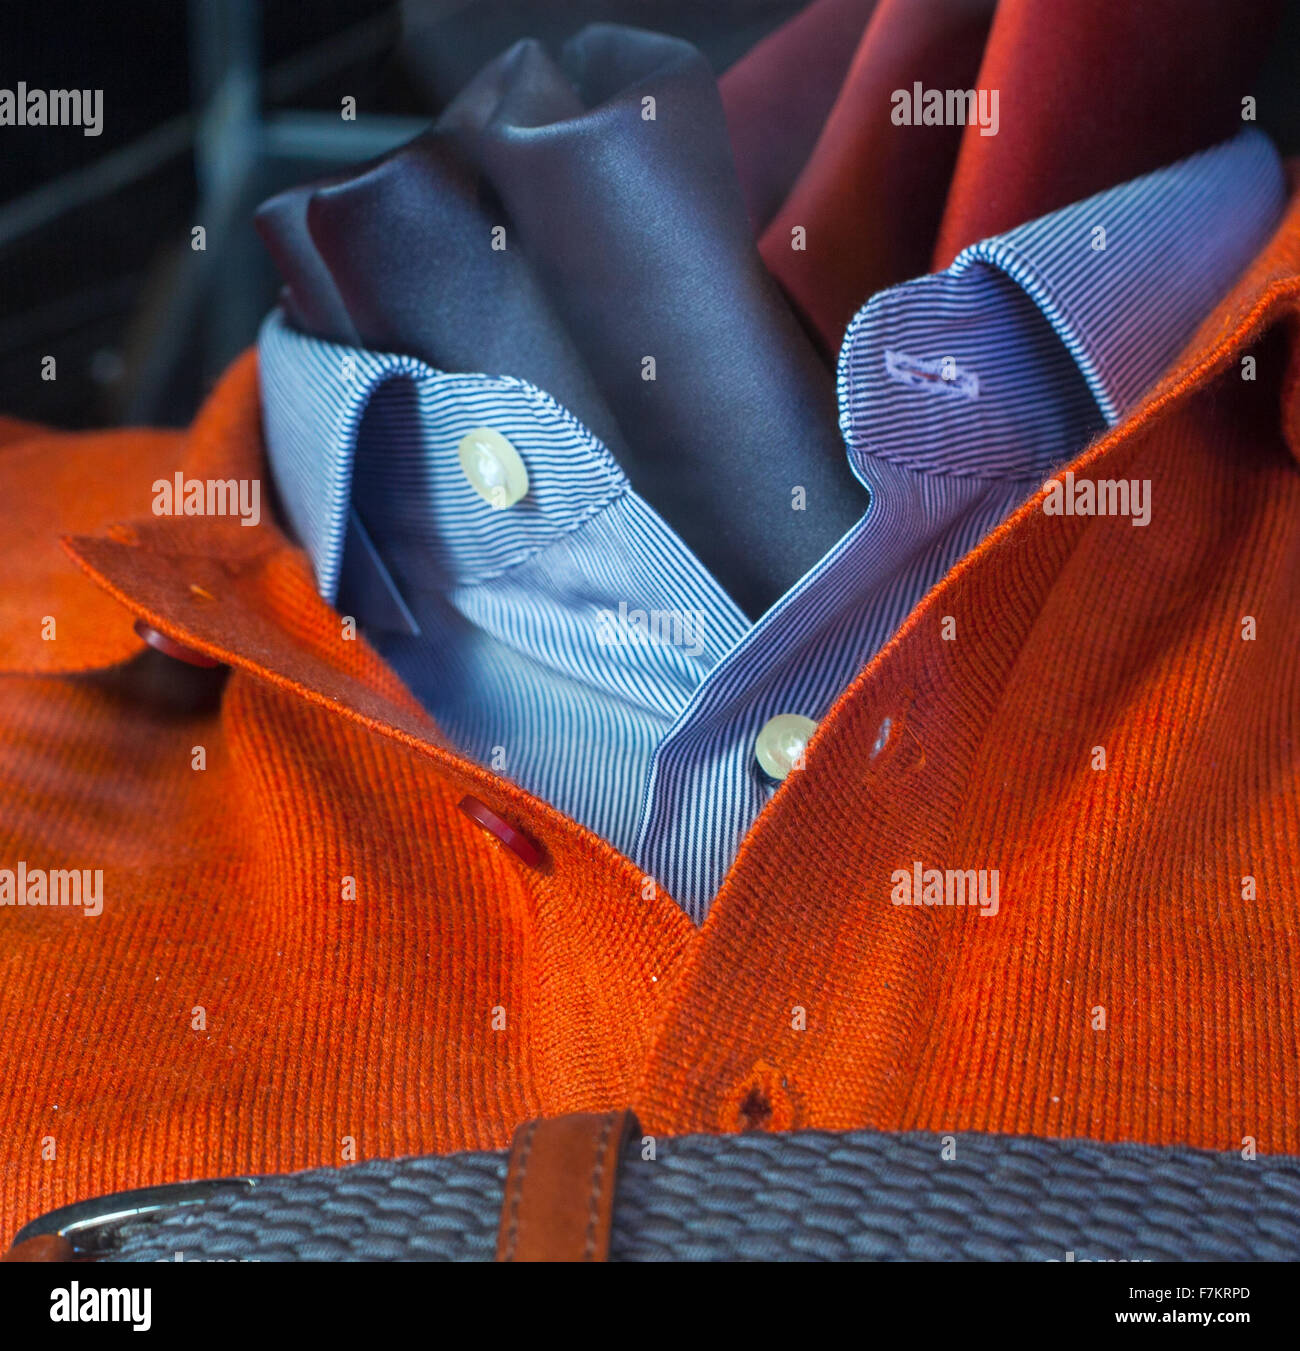 Close up of men's clothes, pullover shirt and necktie Stock Photo